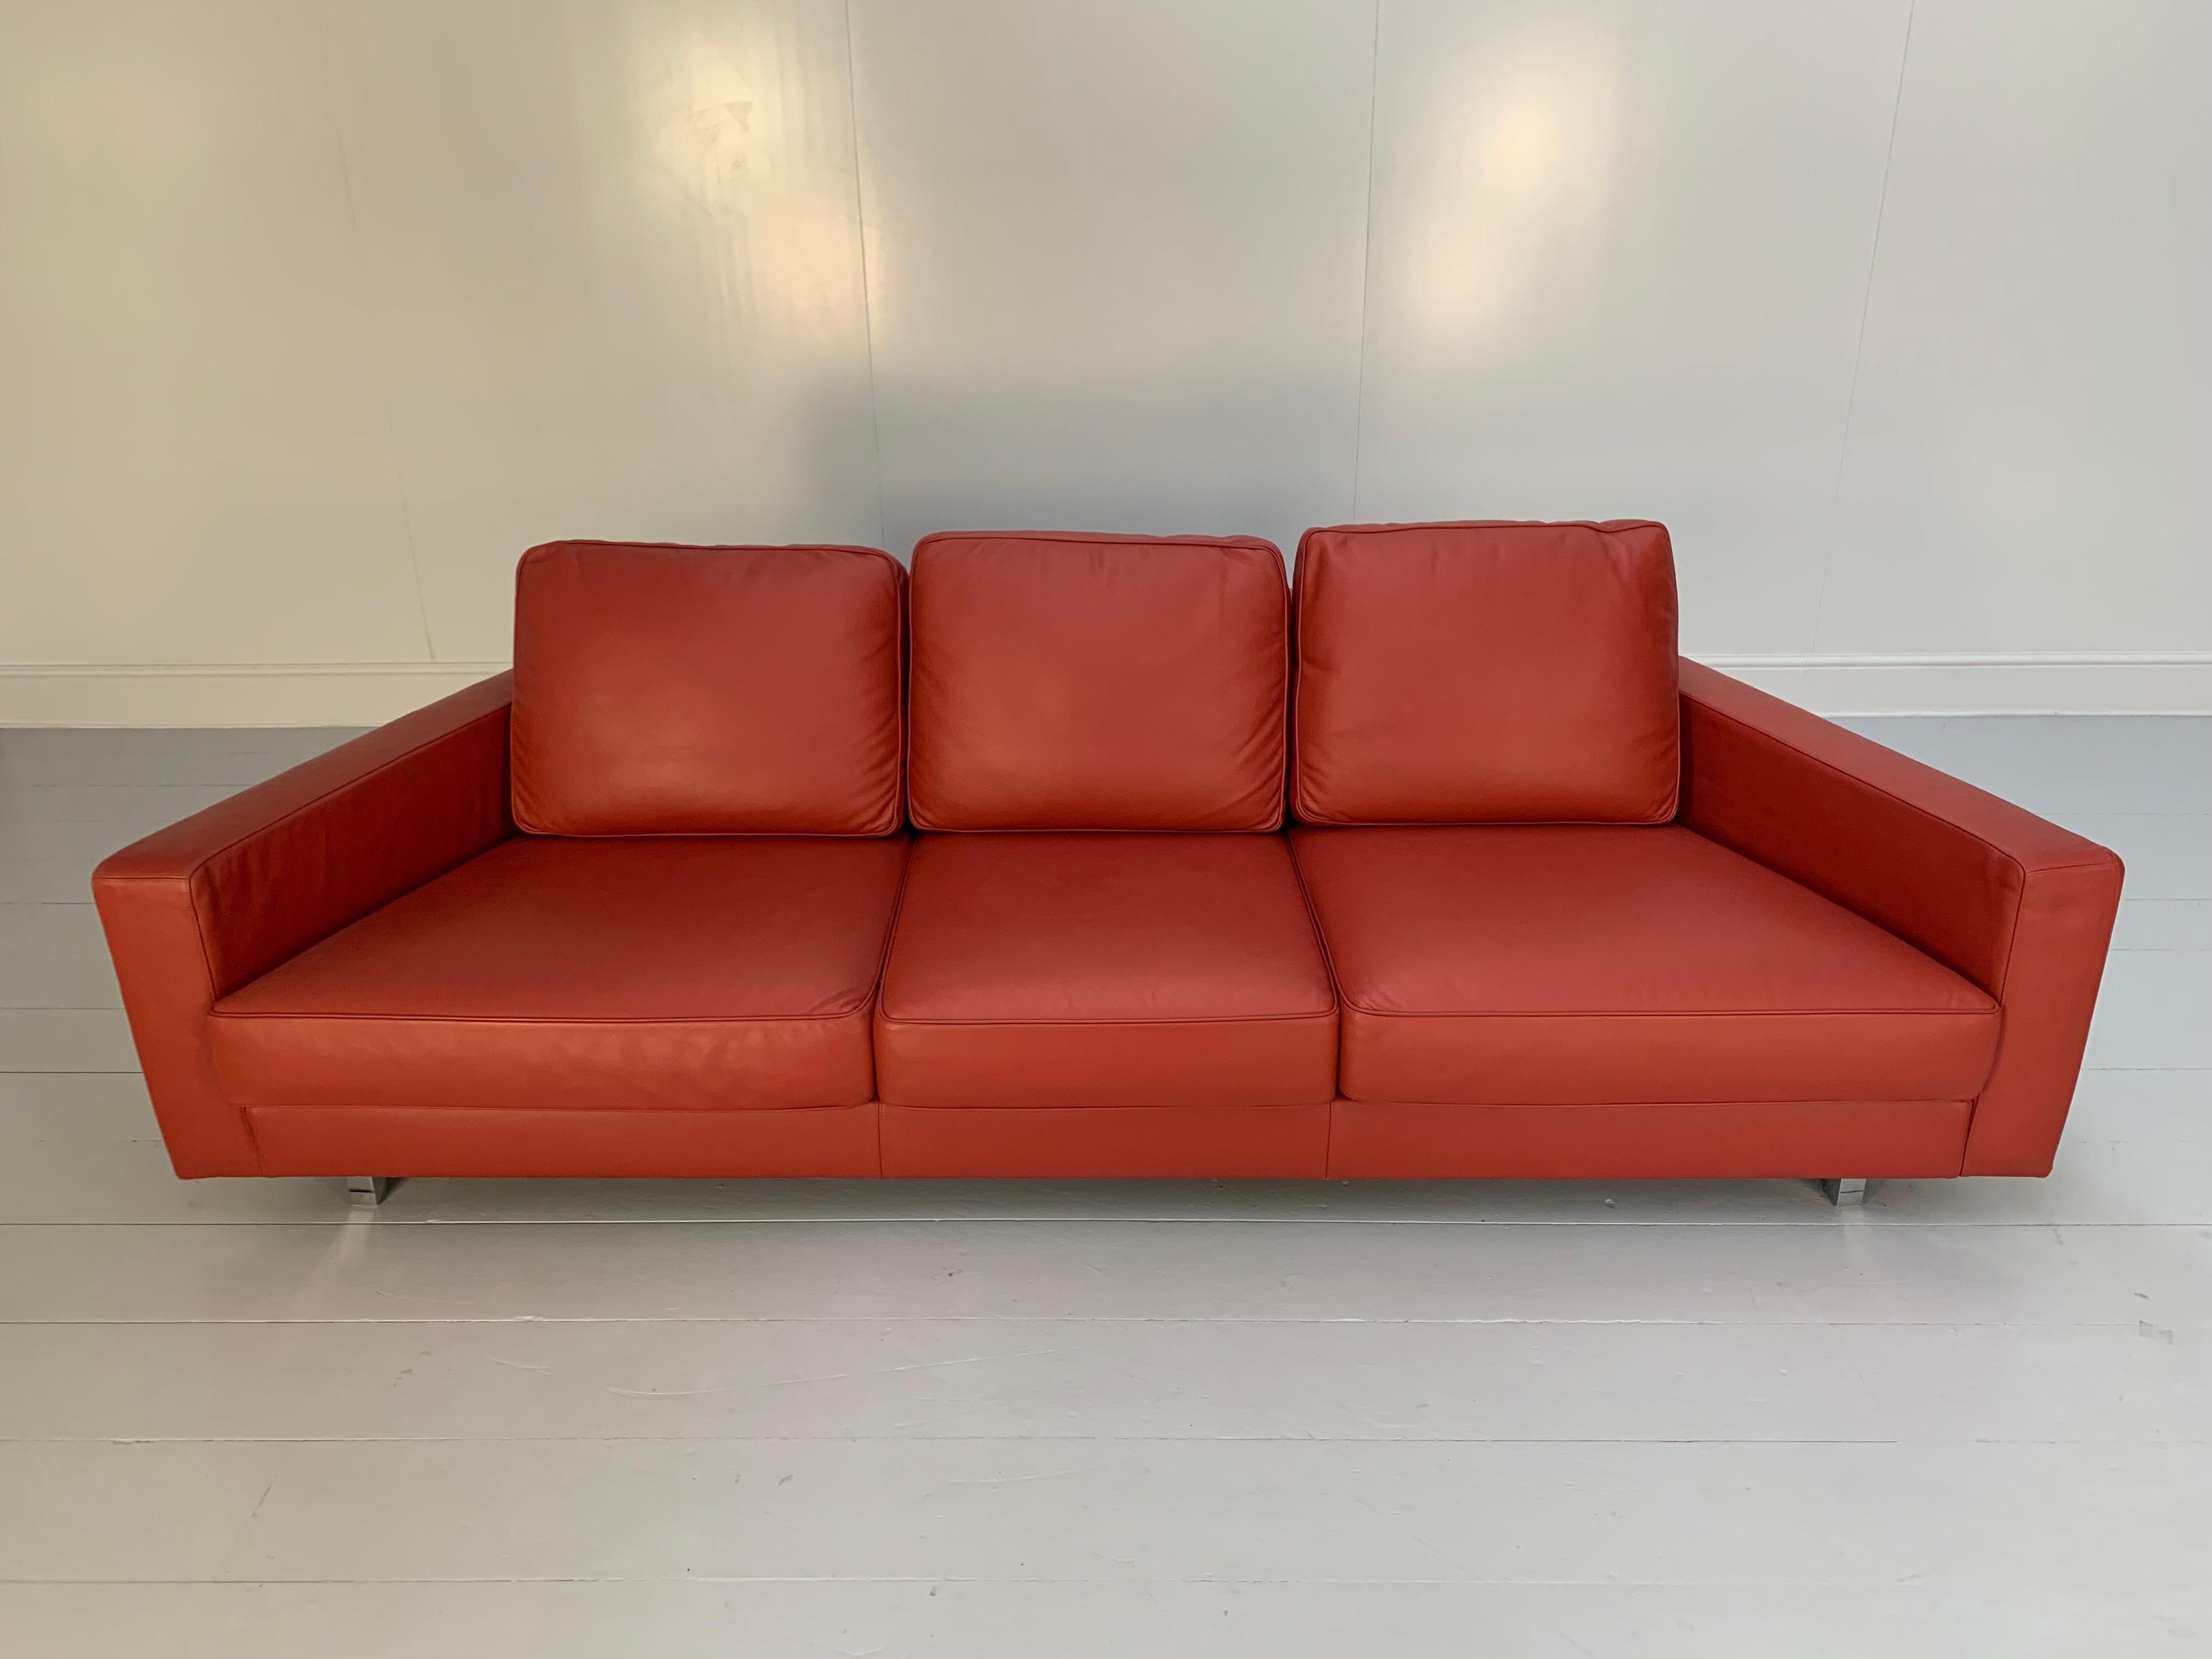 Moroso “Hyde Park” Sofa & 2 Armchair Suite, in Red “Pelle” Leather For Sale 1